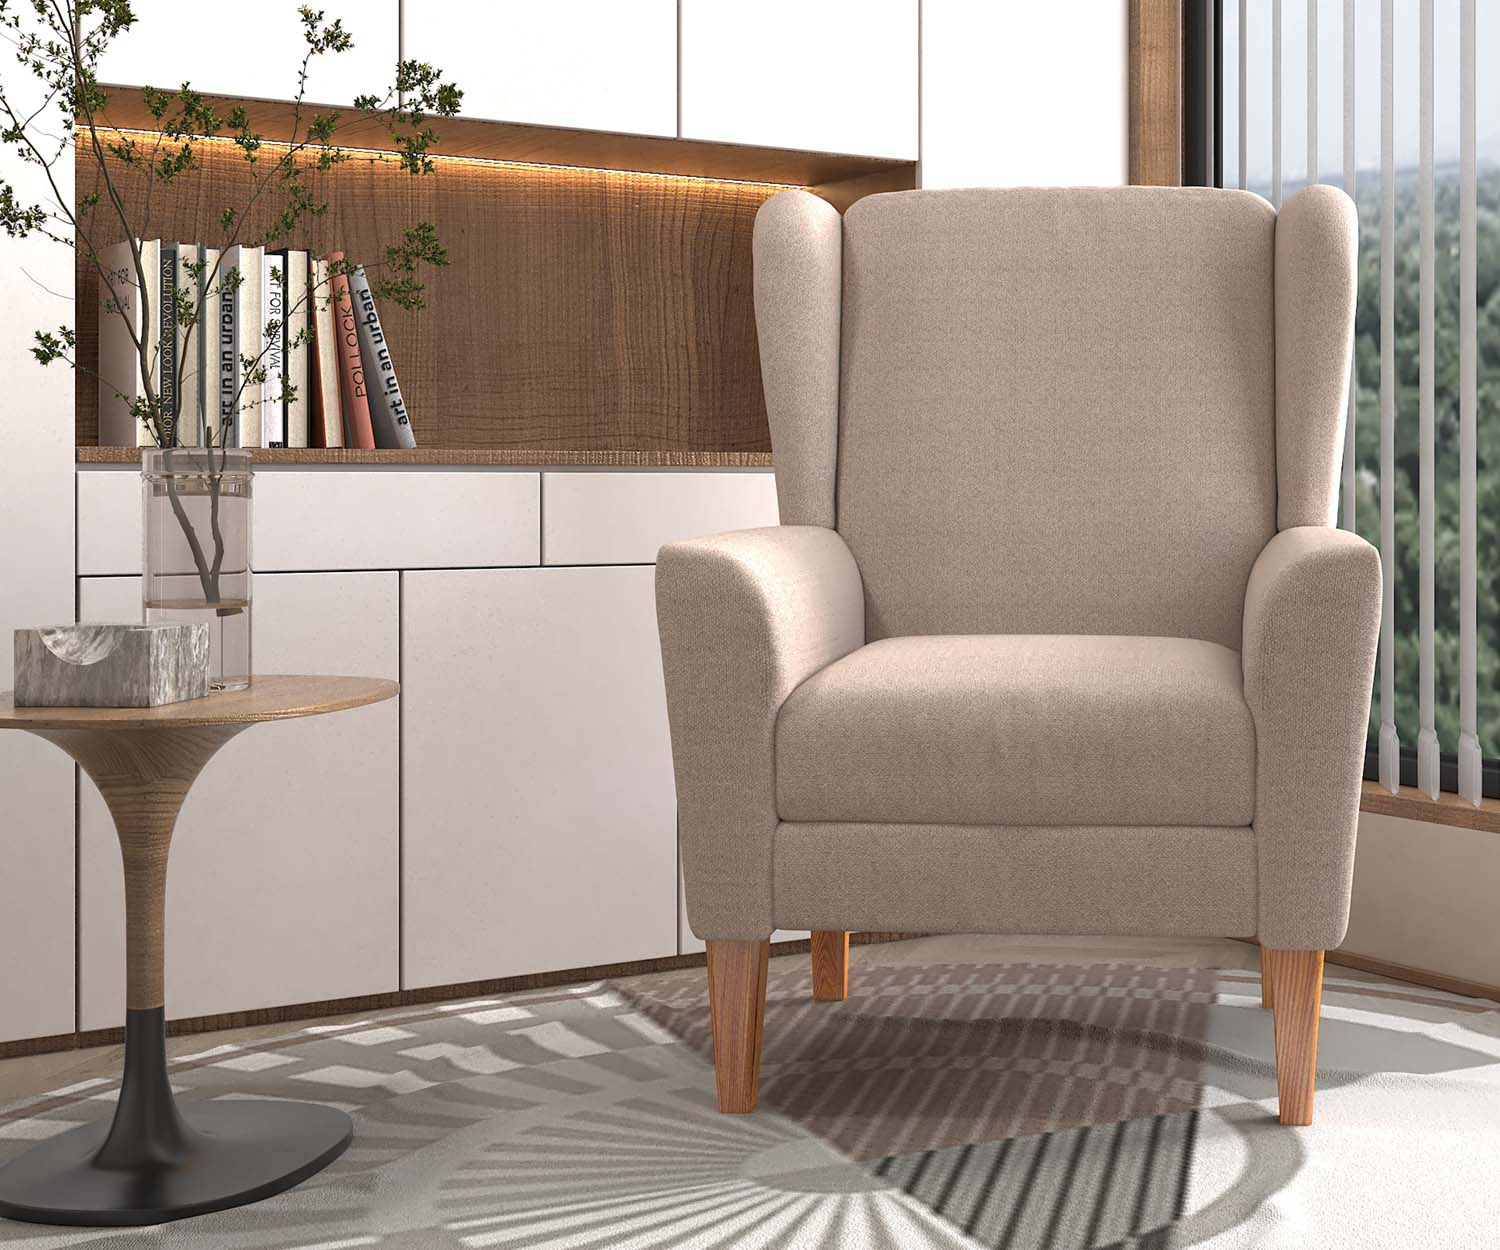 Palmer Wing Back Armchair